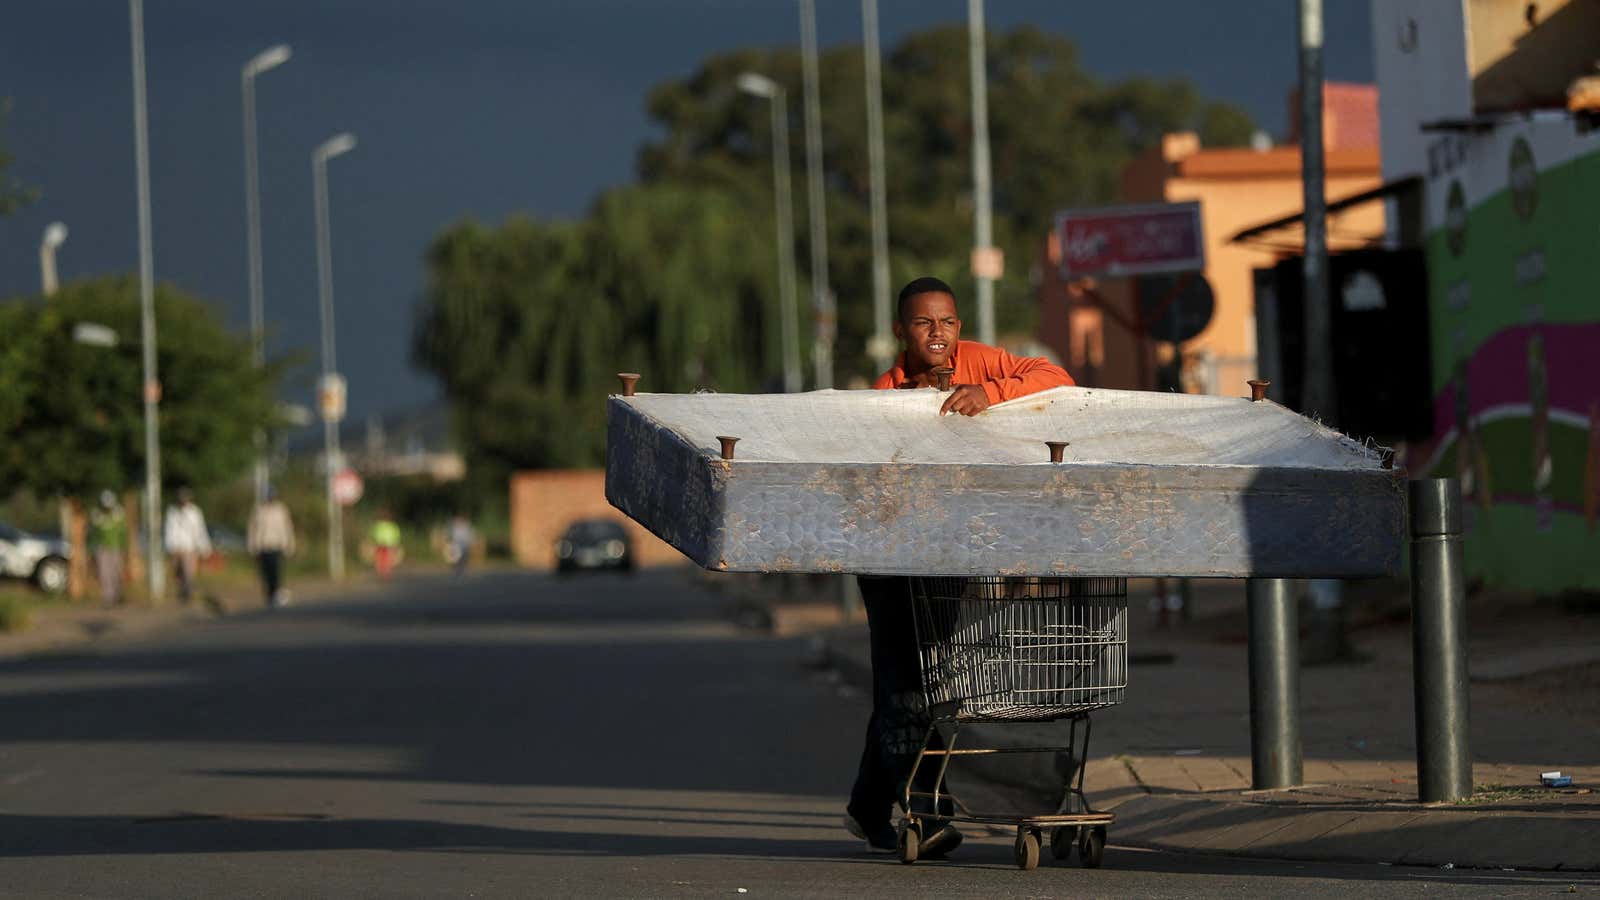 A man transports a bed on a trolley as the coronavirus disease (COVID-19) lockdown regulations ease in Soweto, South Africa, April 7, 2021. REUTERS/Siphiwe Sibeko